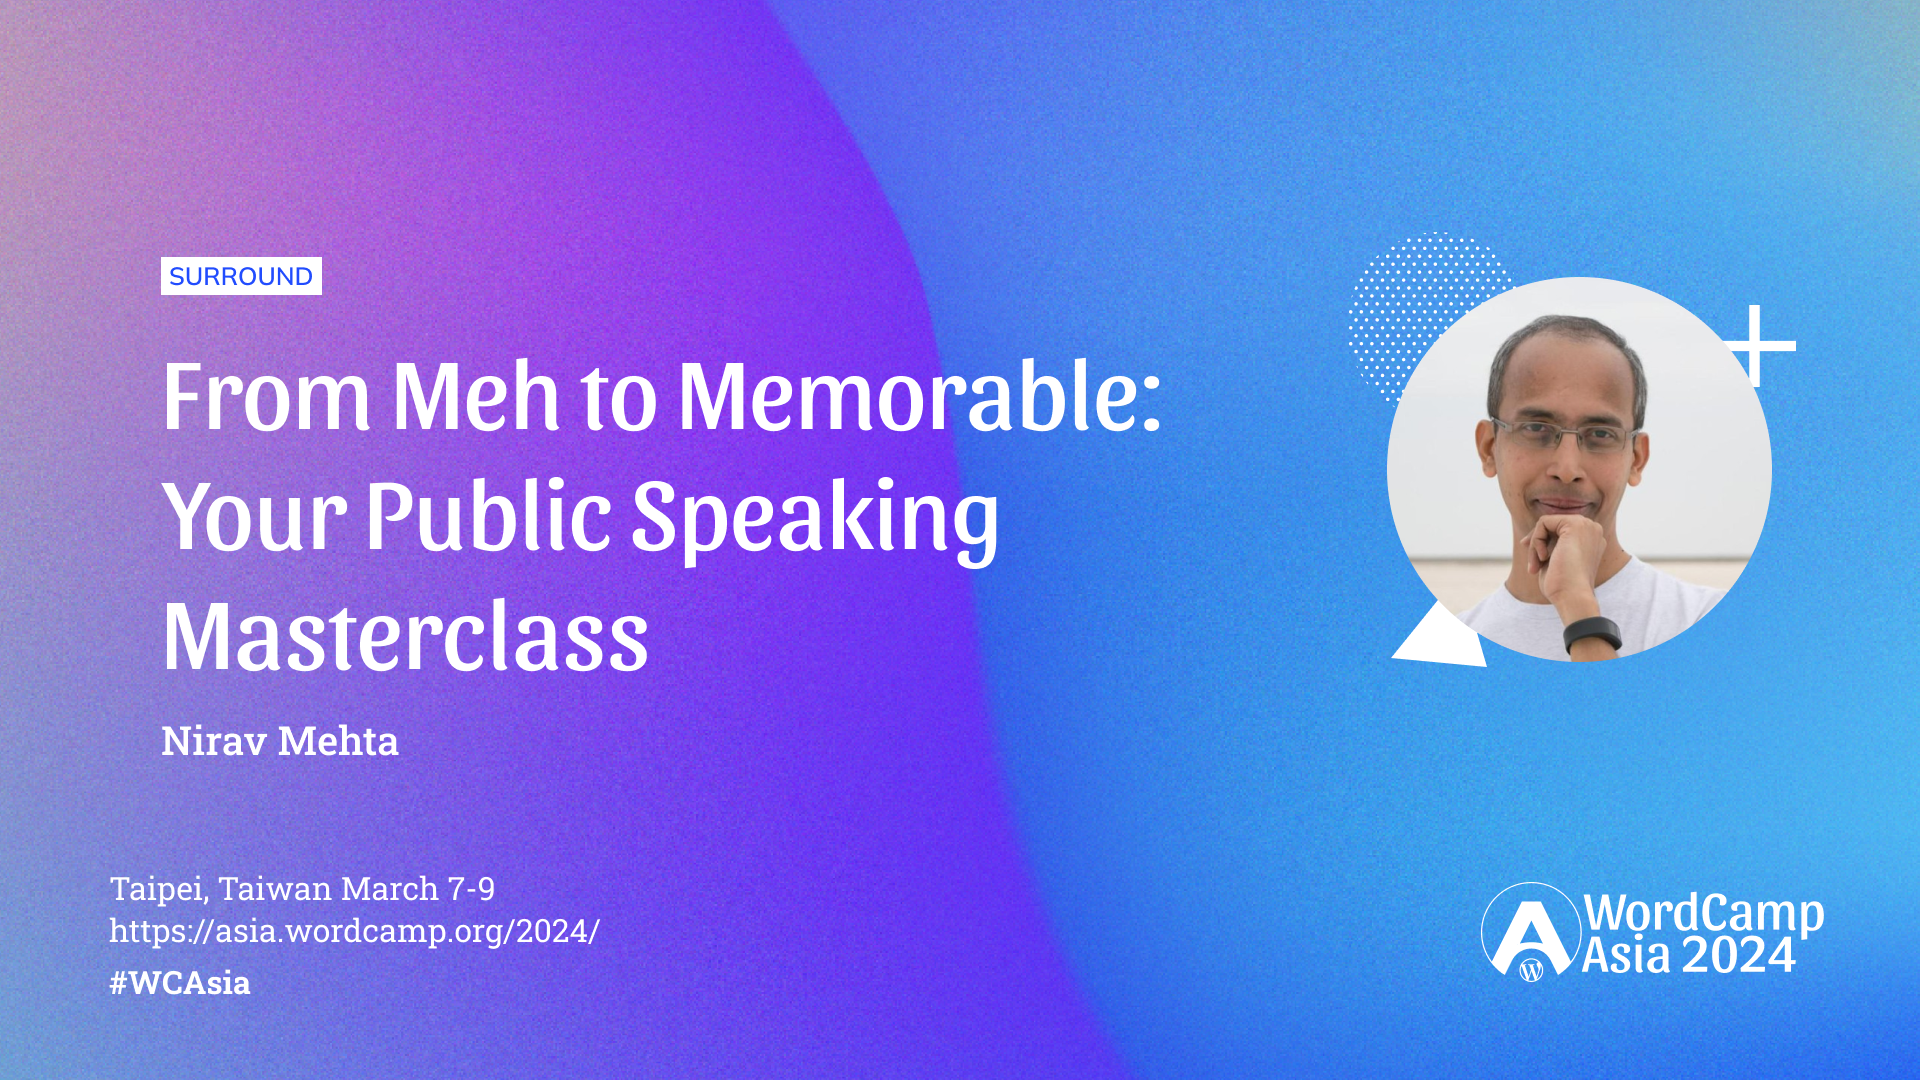 From Meh to Memorable: Your Public Speaking Masterclass